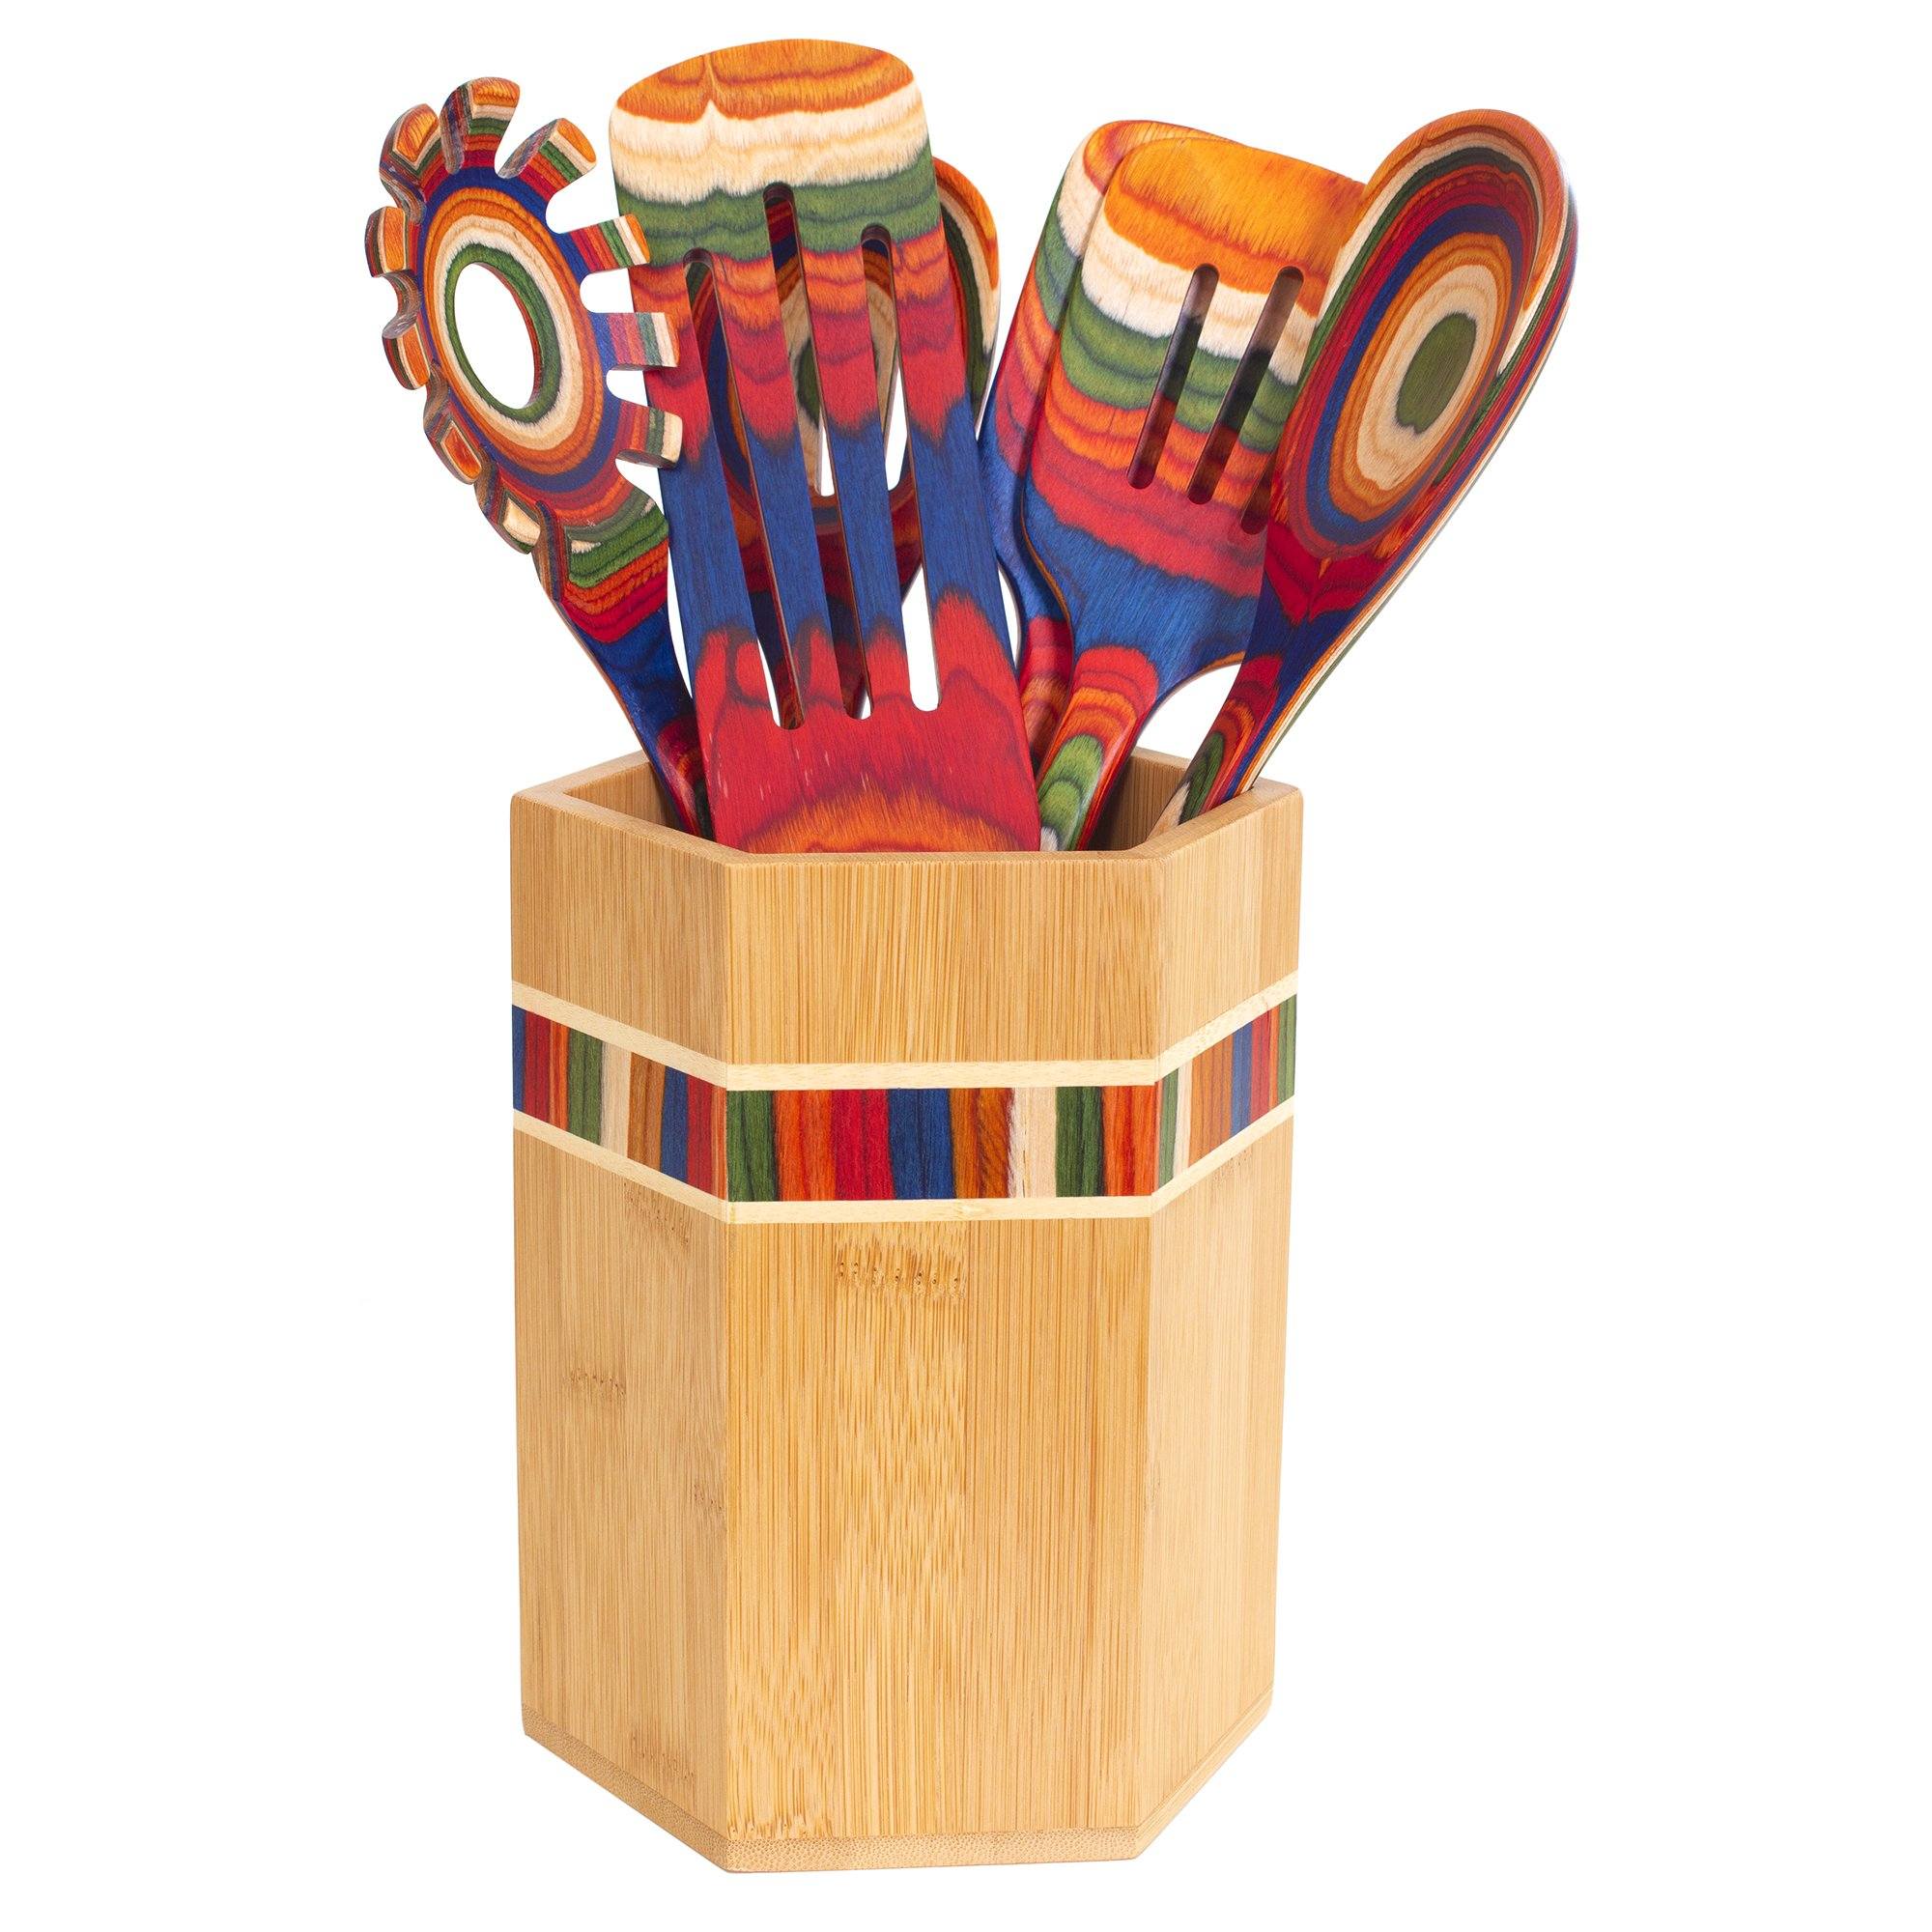 Check Utensil Holder  Urban Outfitters Japan - Clothing, Music